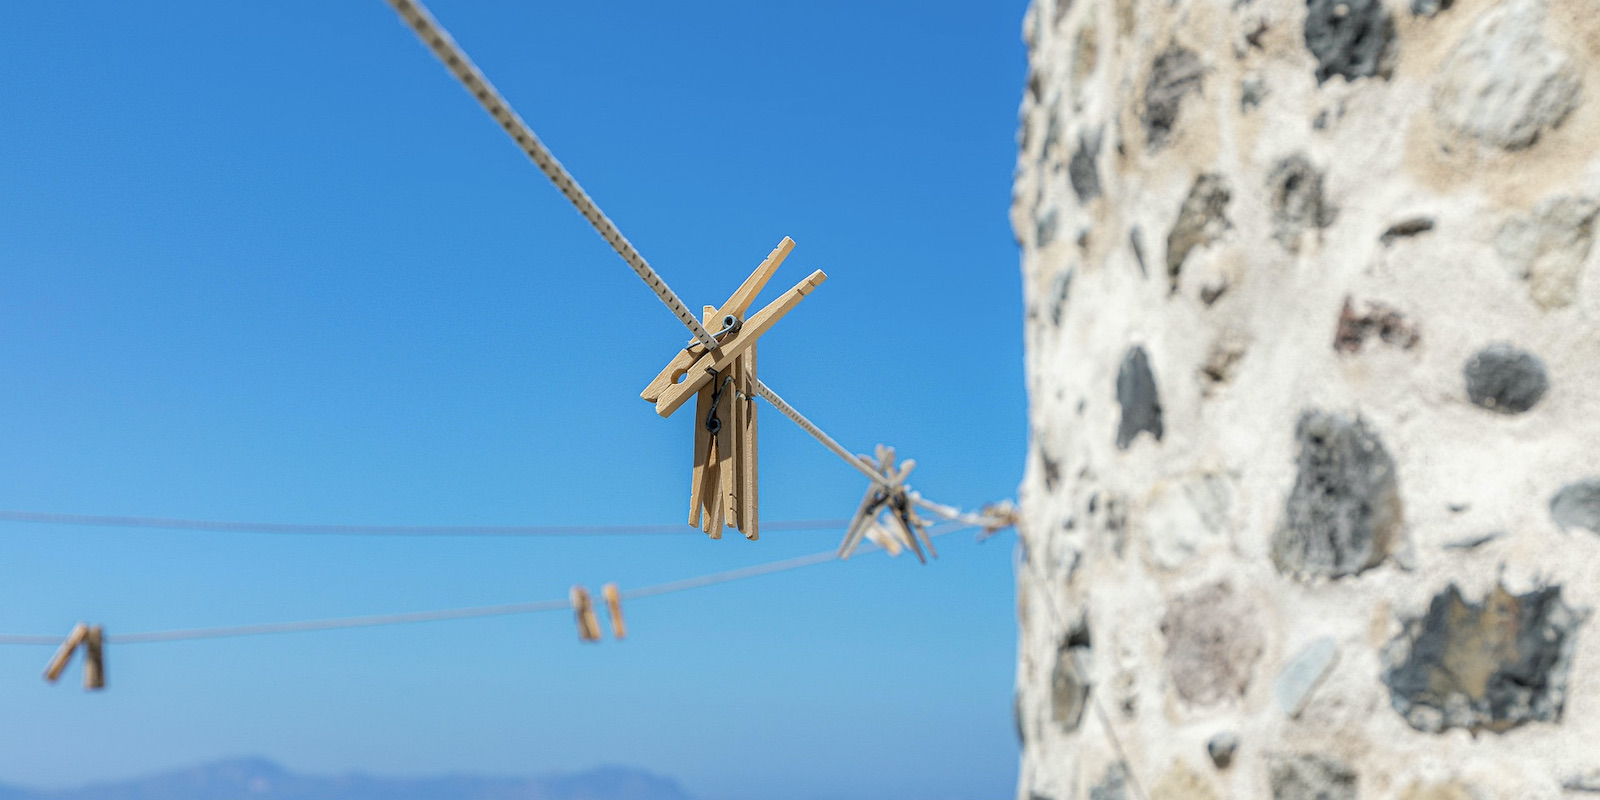 A photograph of an empty clothesline with wooden clothespins next to a tall stone wall in front of a clear blue sky.